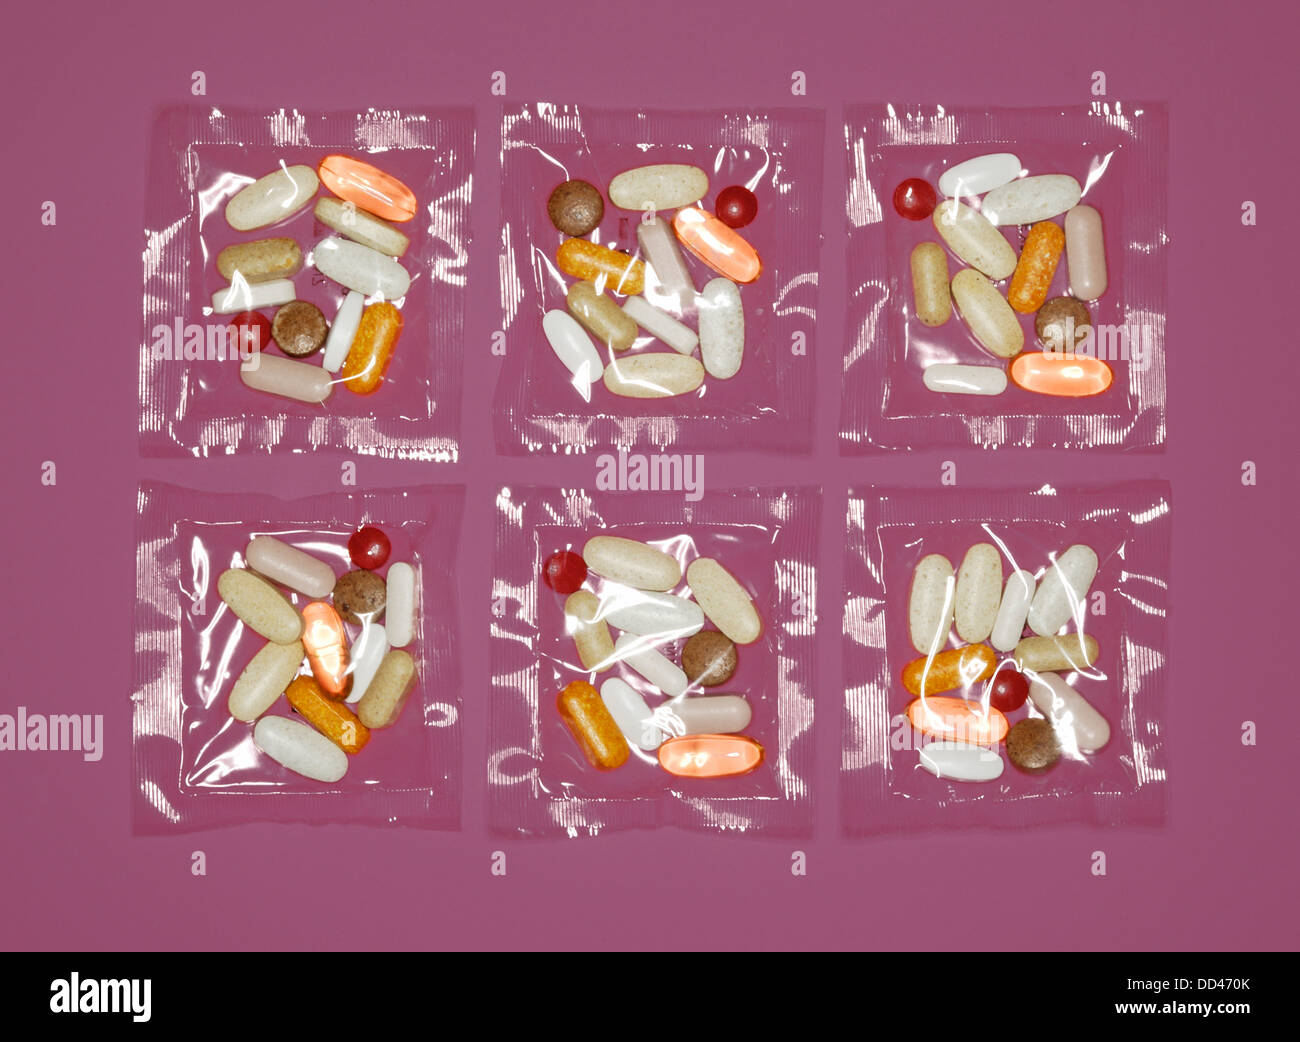 A plastic clear packets of vitamin supplements - pills, capsules and tablets. Red and purple background Stock Photo